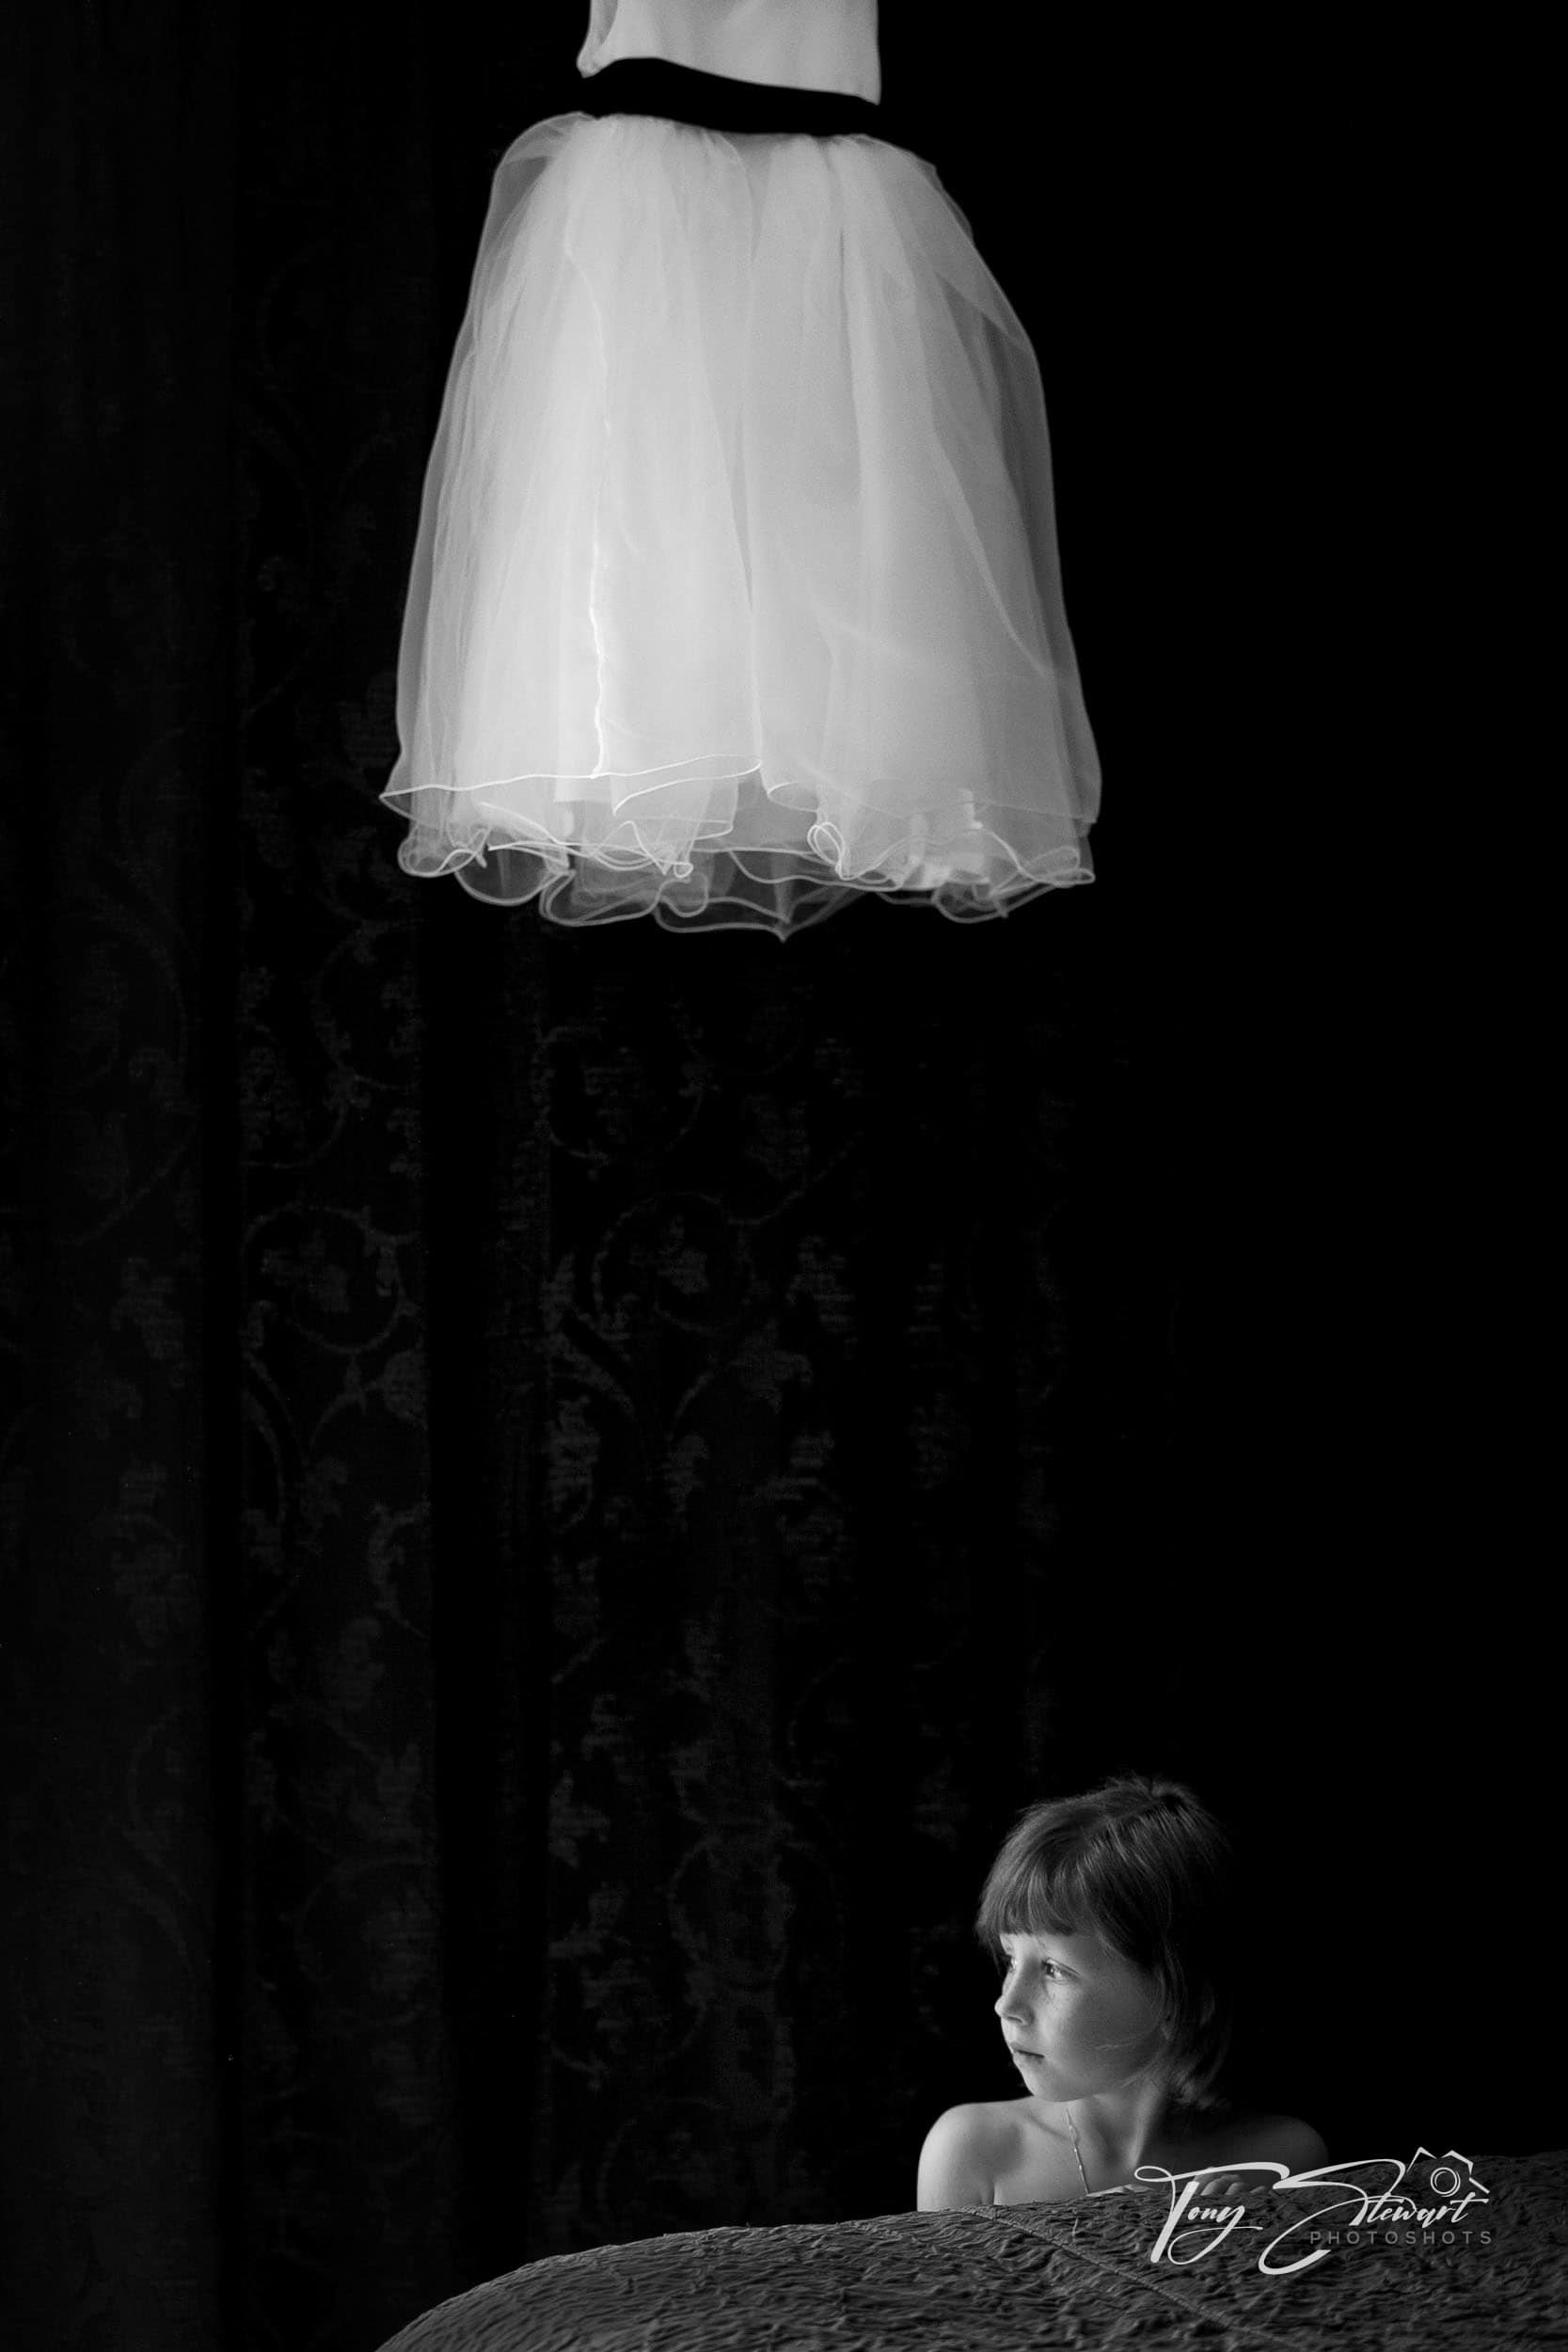 A young bridesmaid poses whistfully by a bed under large wedding dress, lit by strong side window light.